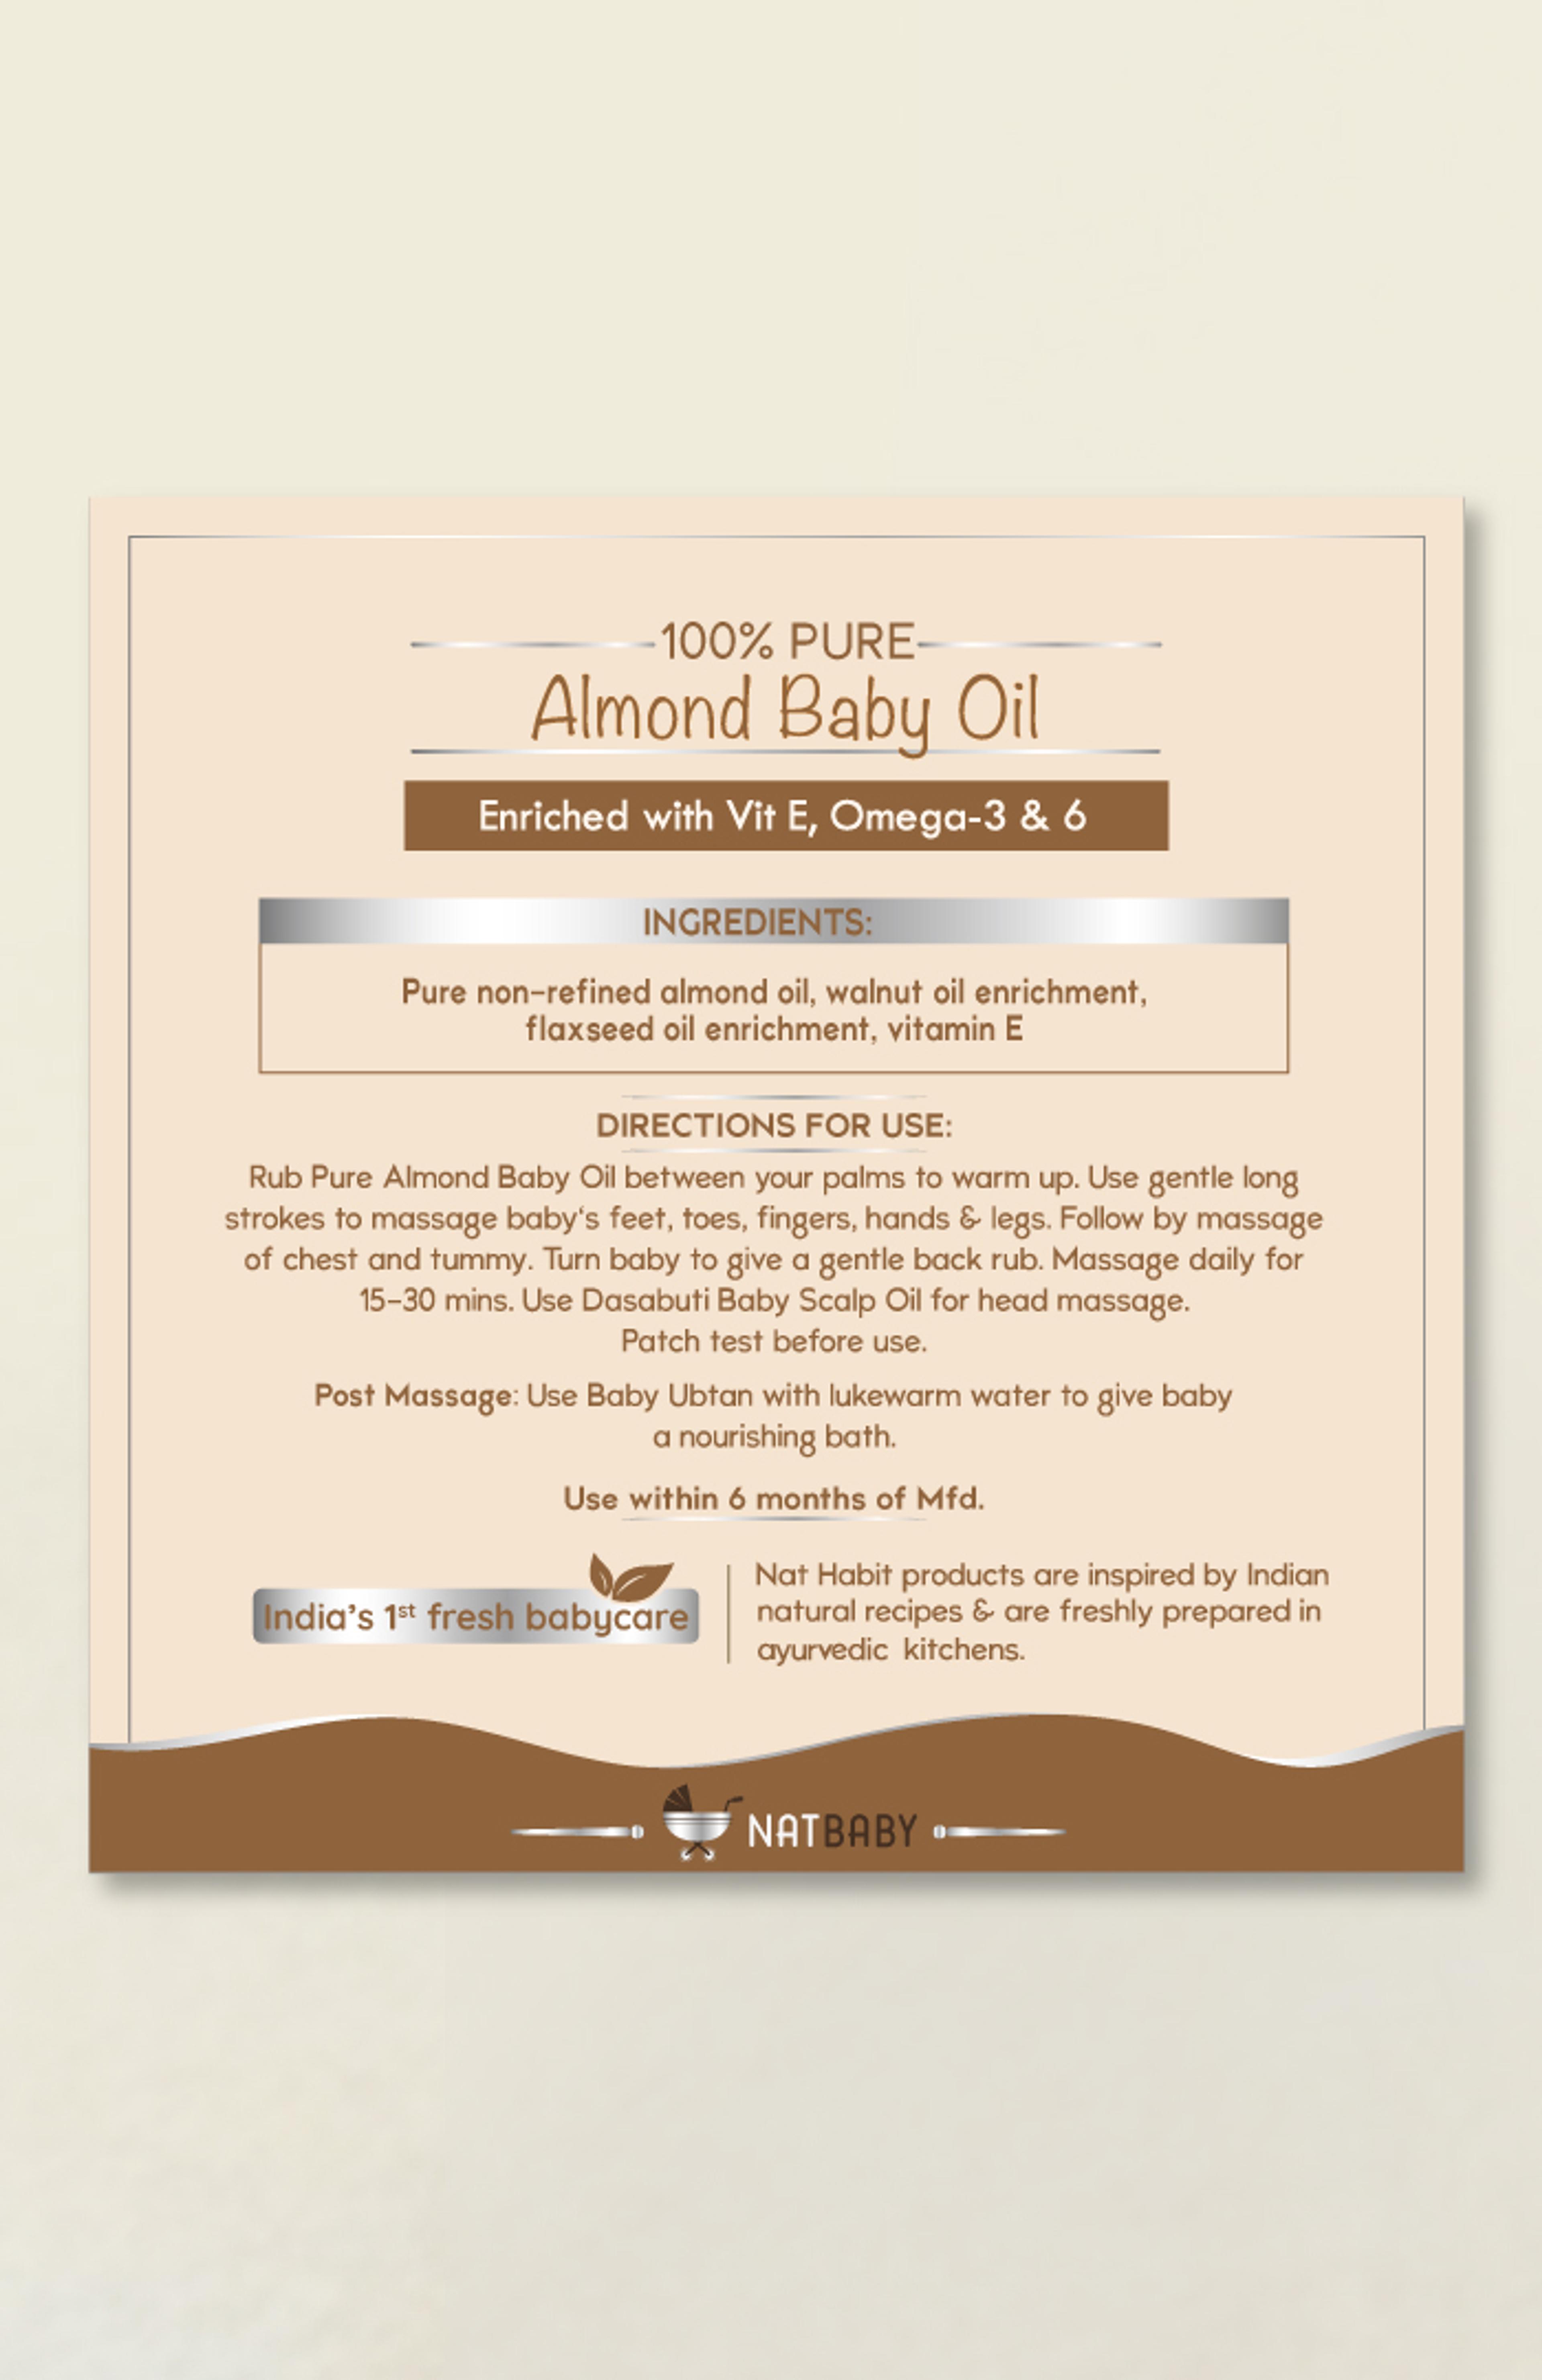 Almond-baby-oil-5